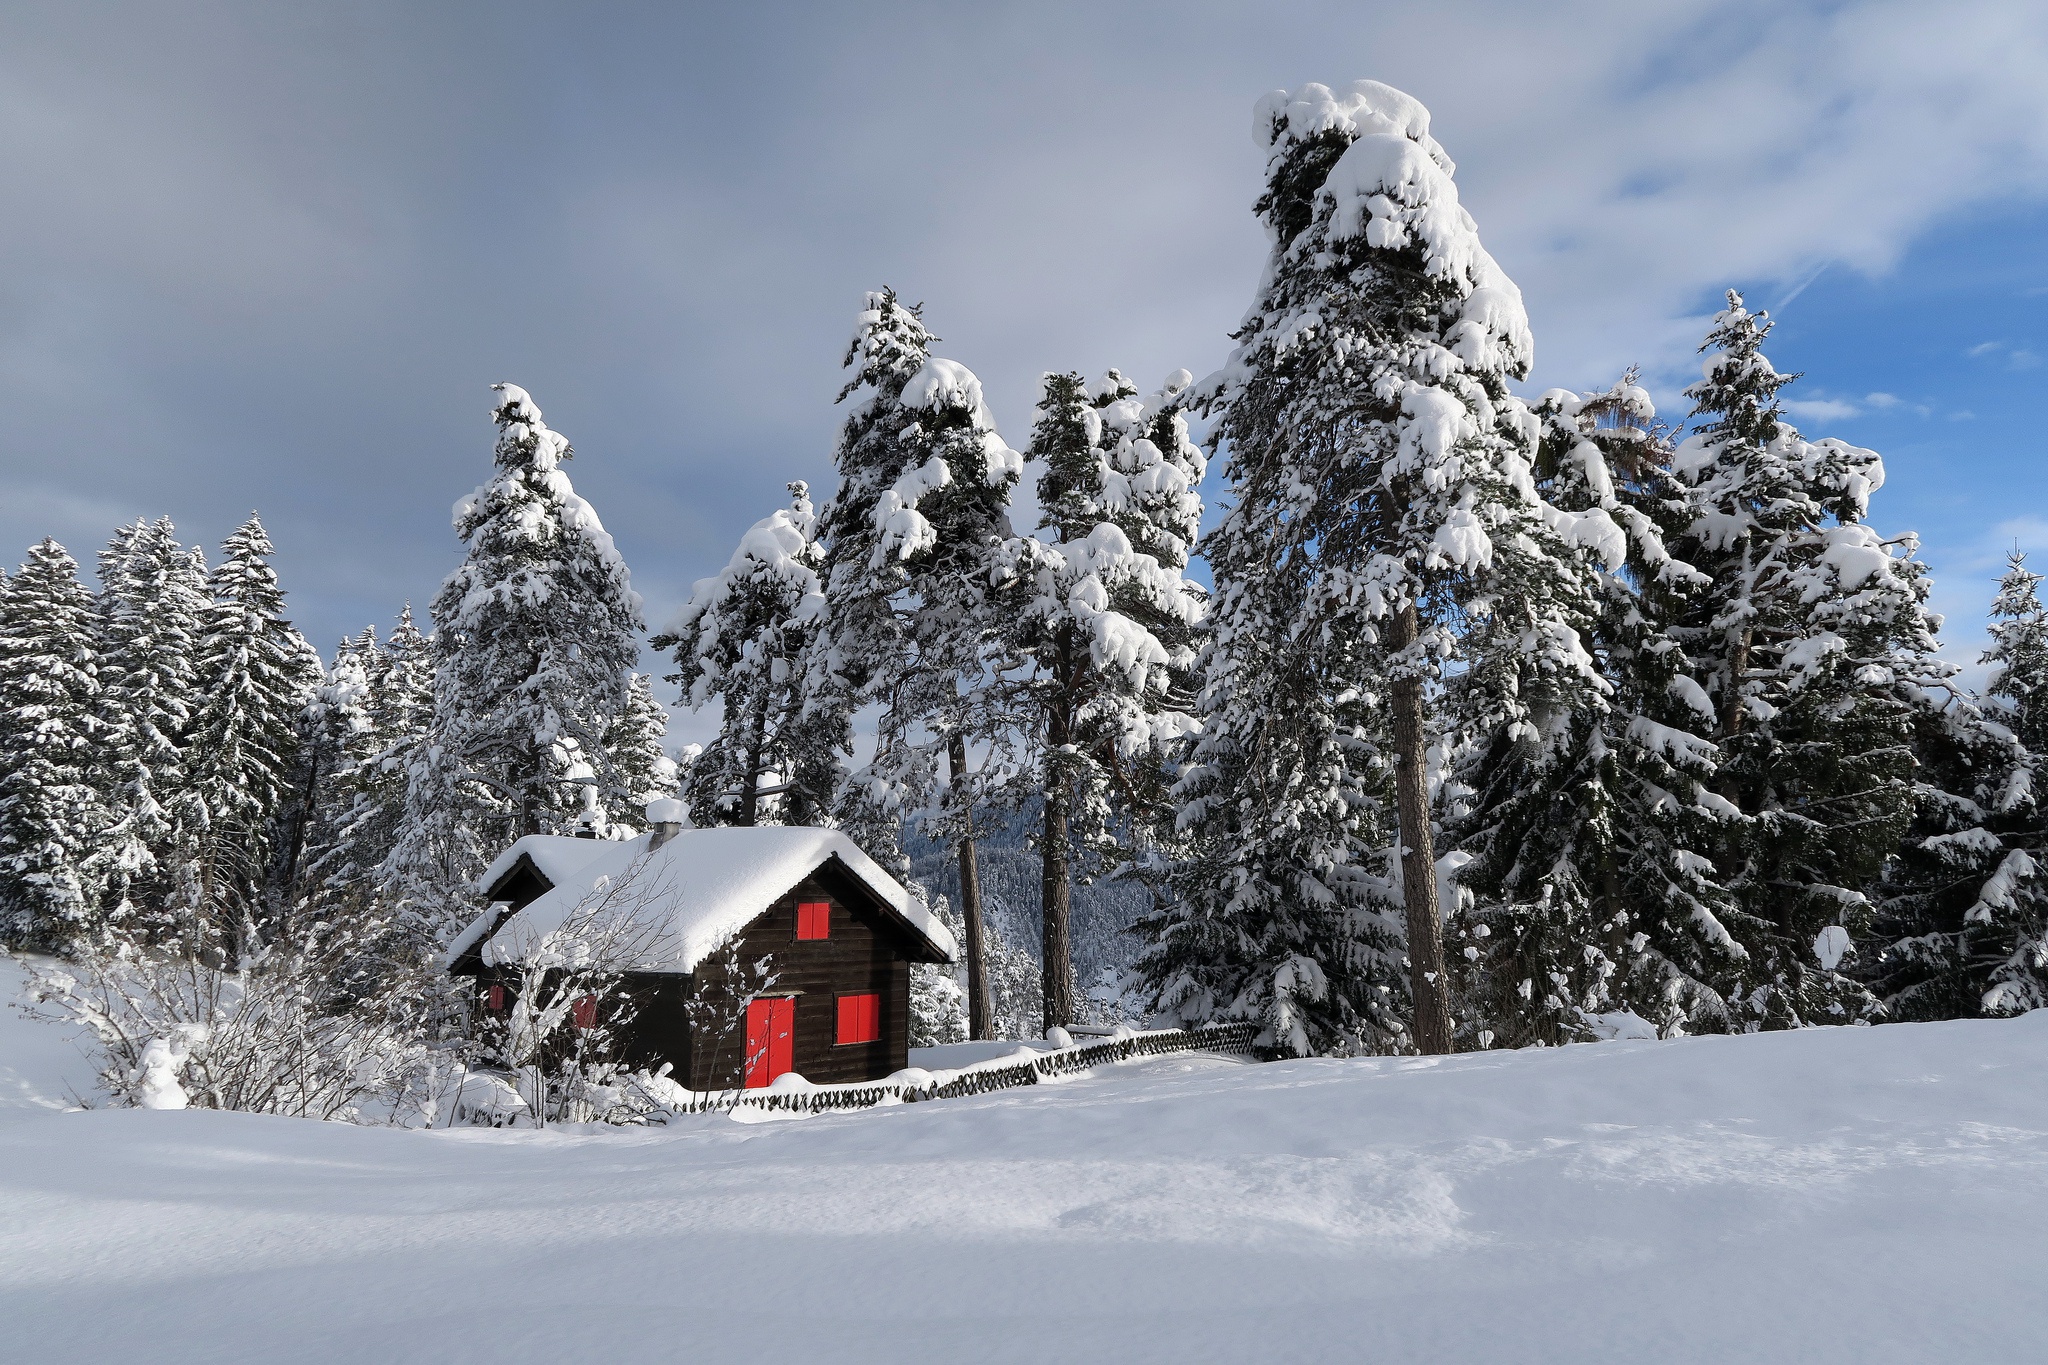 General 2048x1365 winter trees nature snow cabin